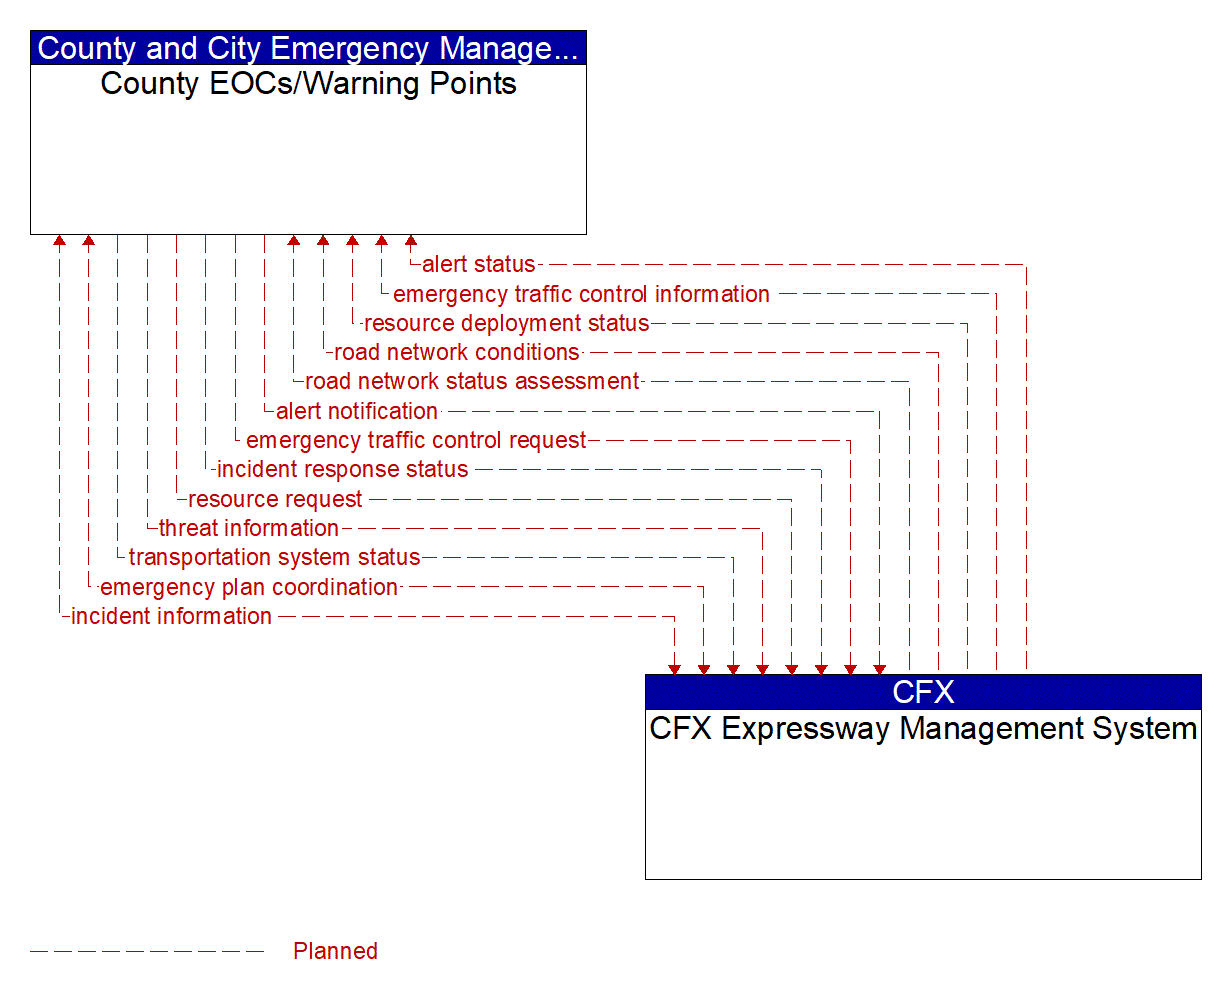 Architecture Flow Diagram: CFX Expressway Management System <--> County EOCs/Warning Points